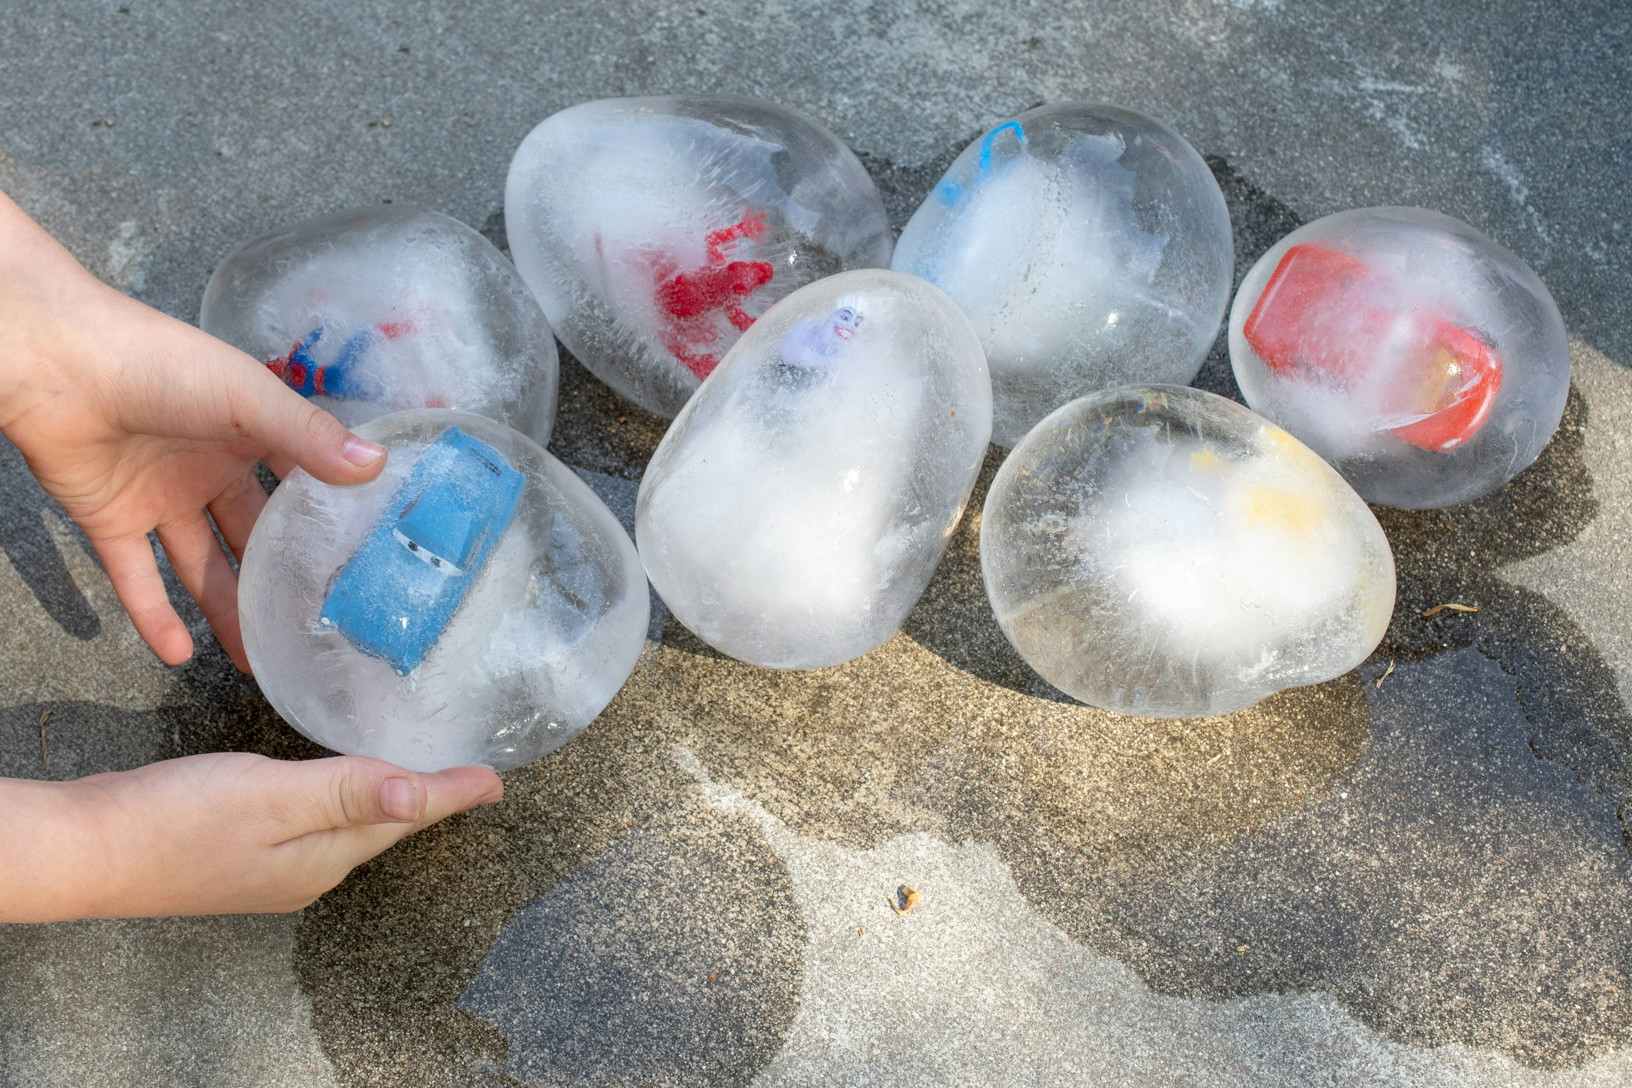 A person's hands picking up a DIY ice egg with a child's toy frozen inside that is sitting on the ground next to similar ice eggs.